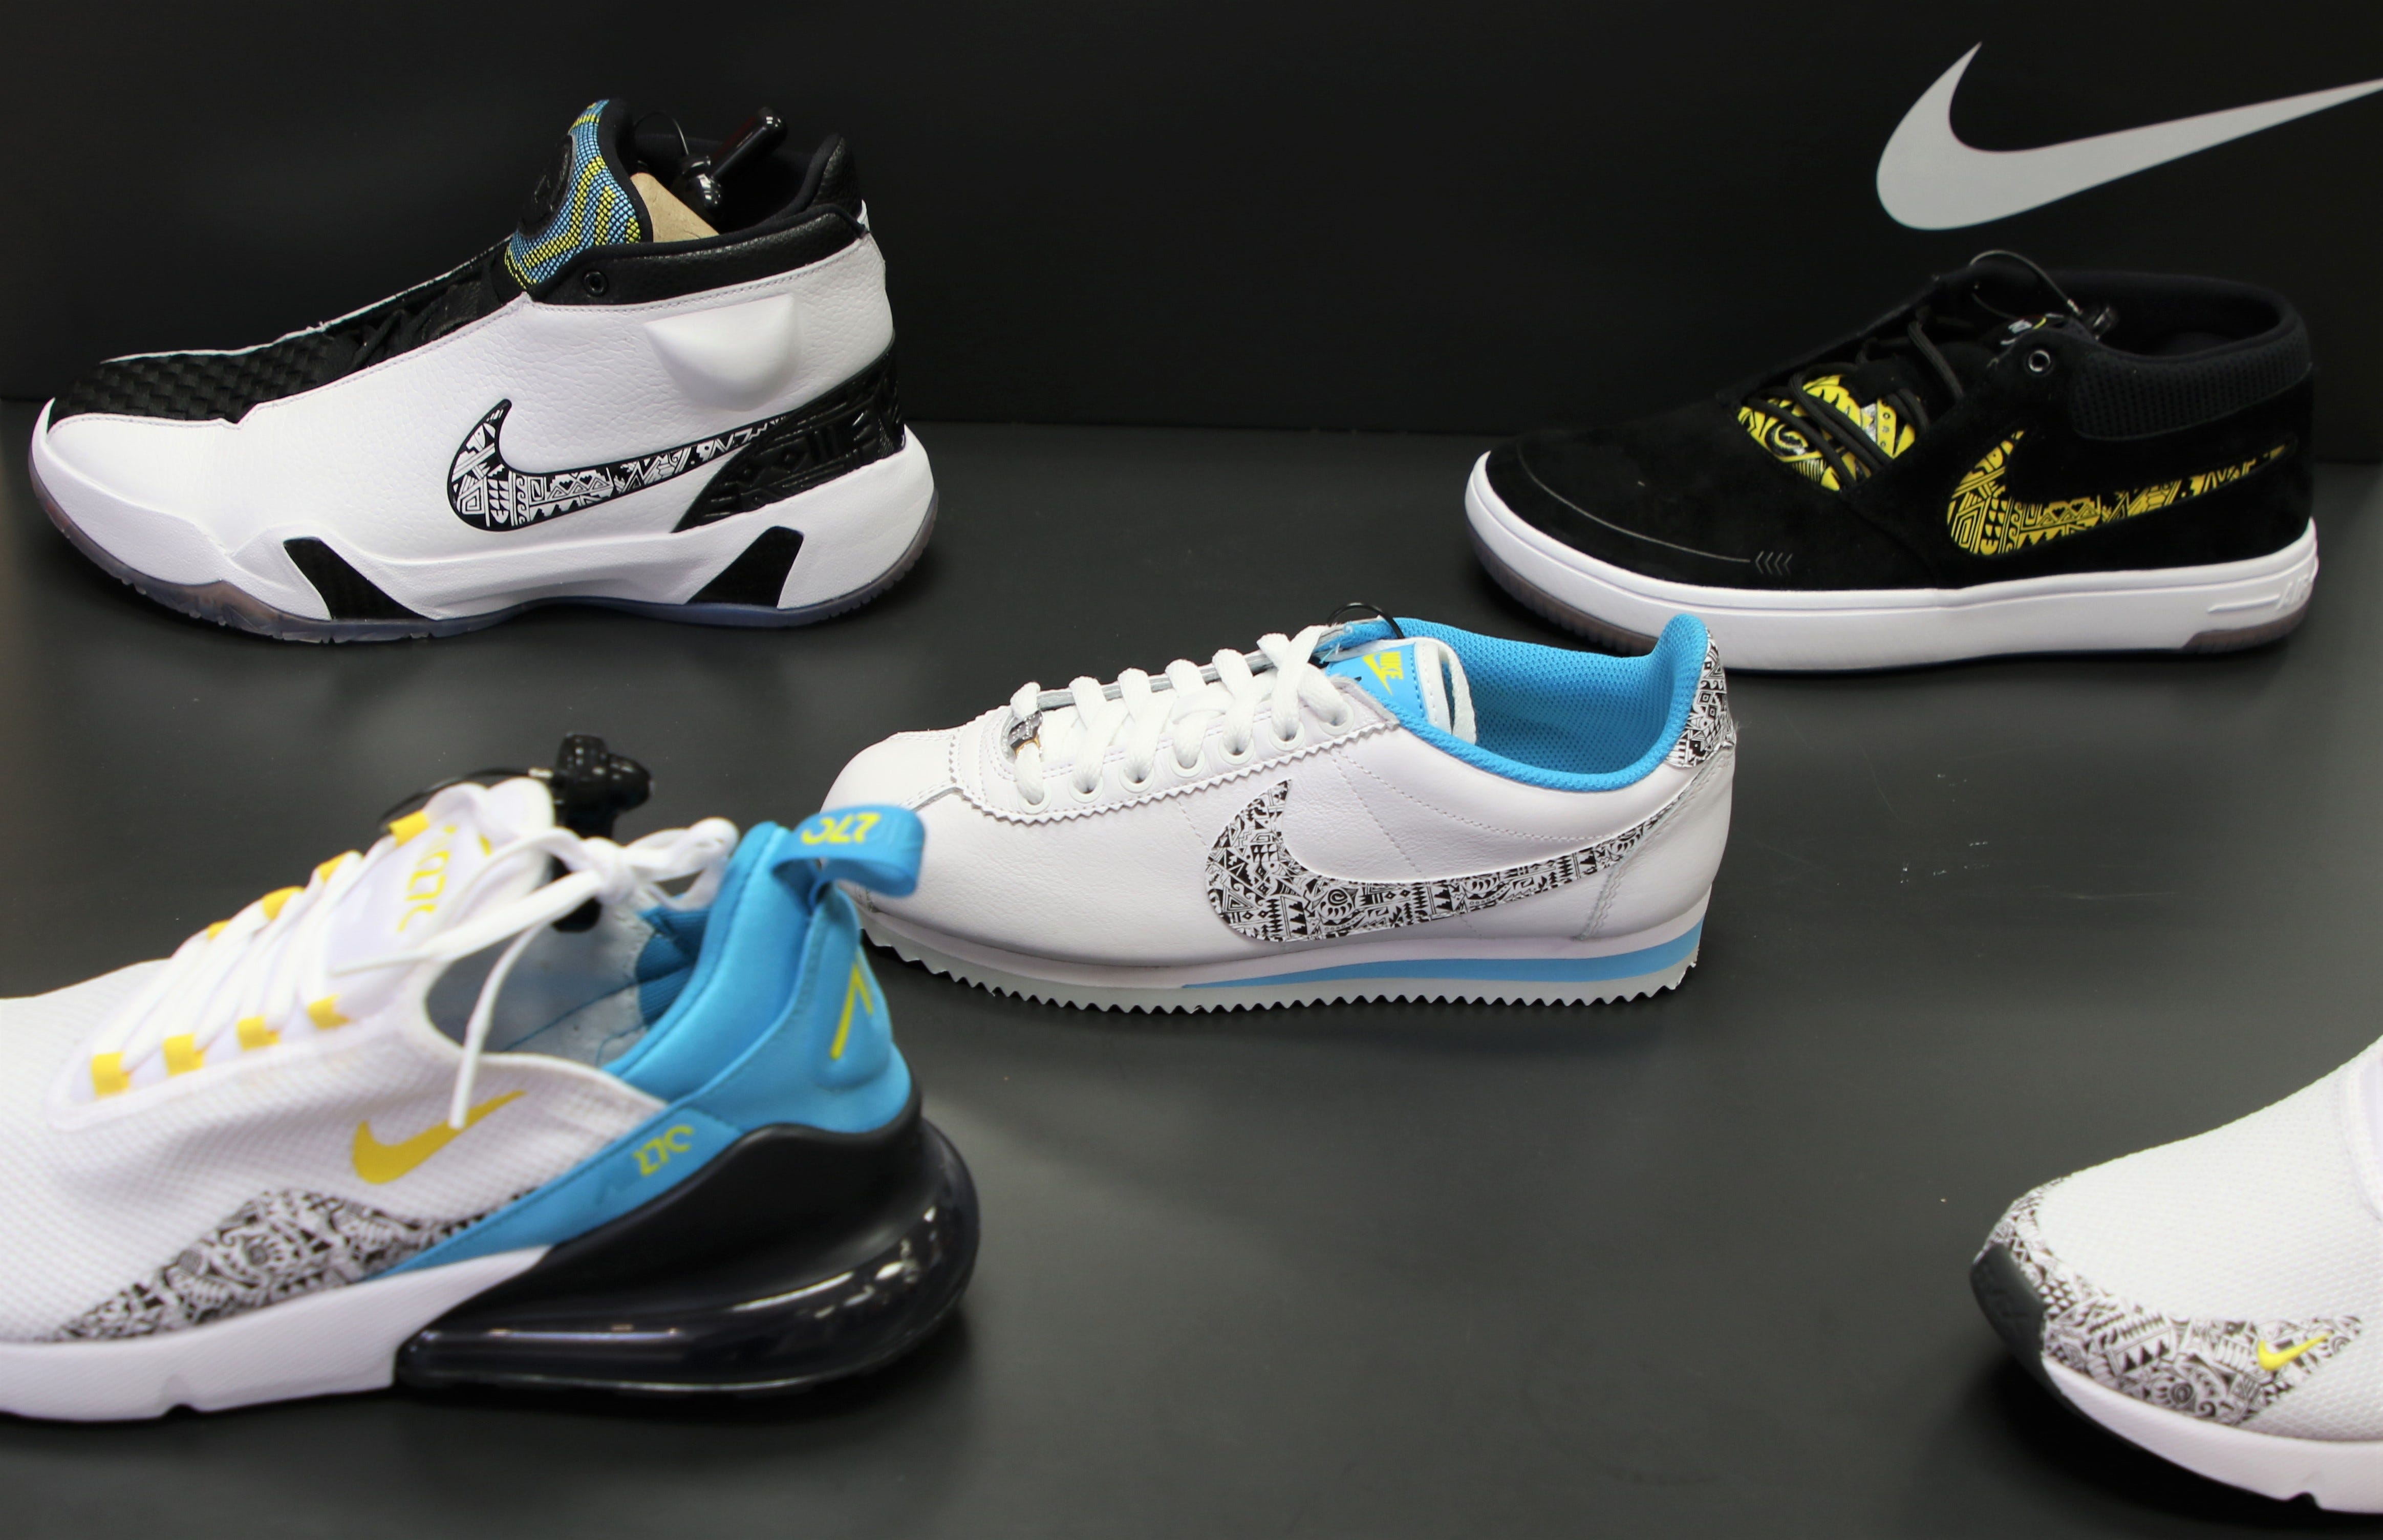 New Nike N7 collection released at 